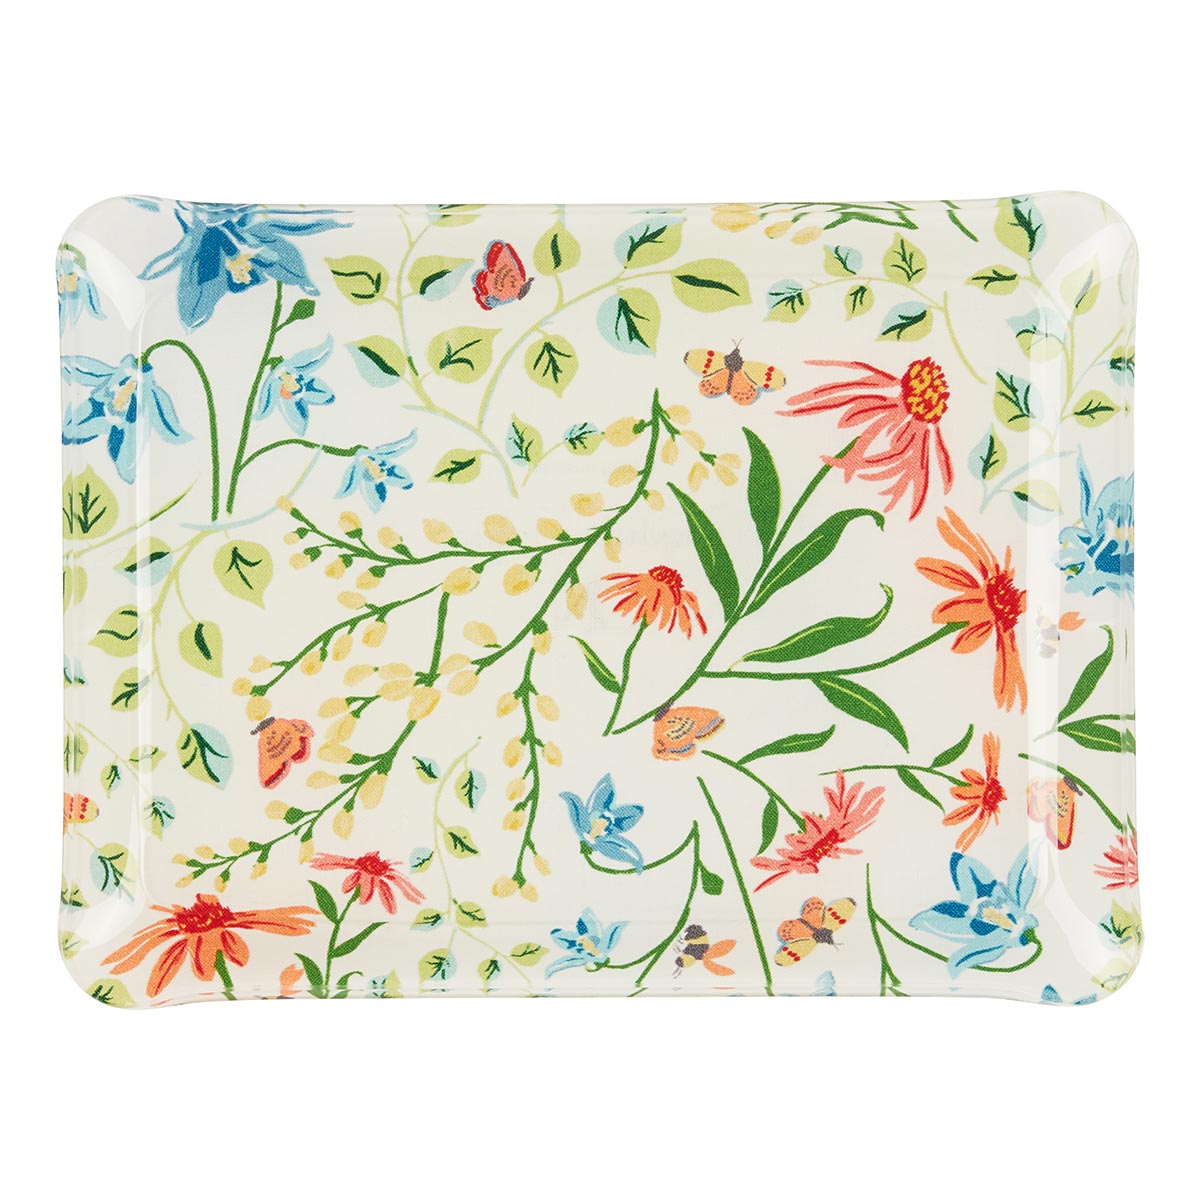 Fabric Tray Small 24X18  - Multi Floral